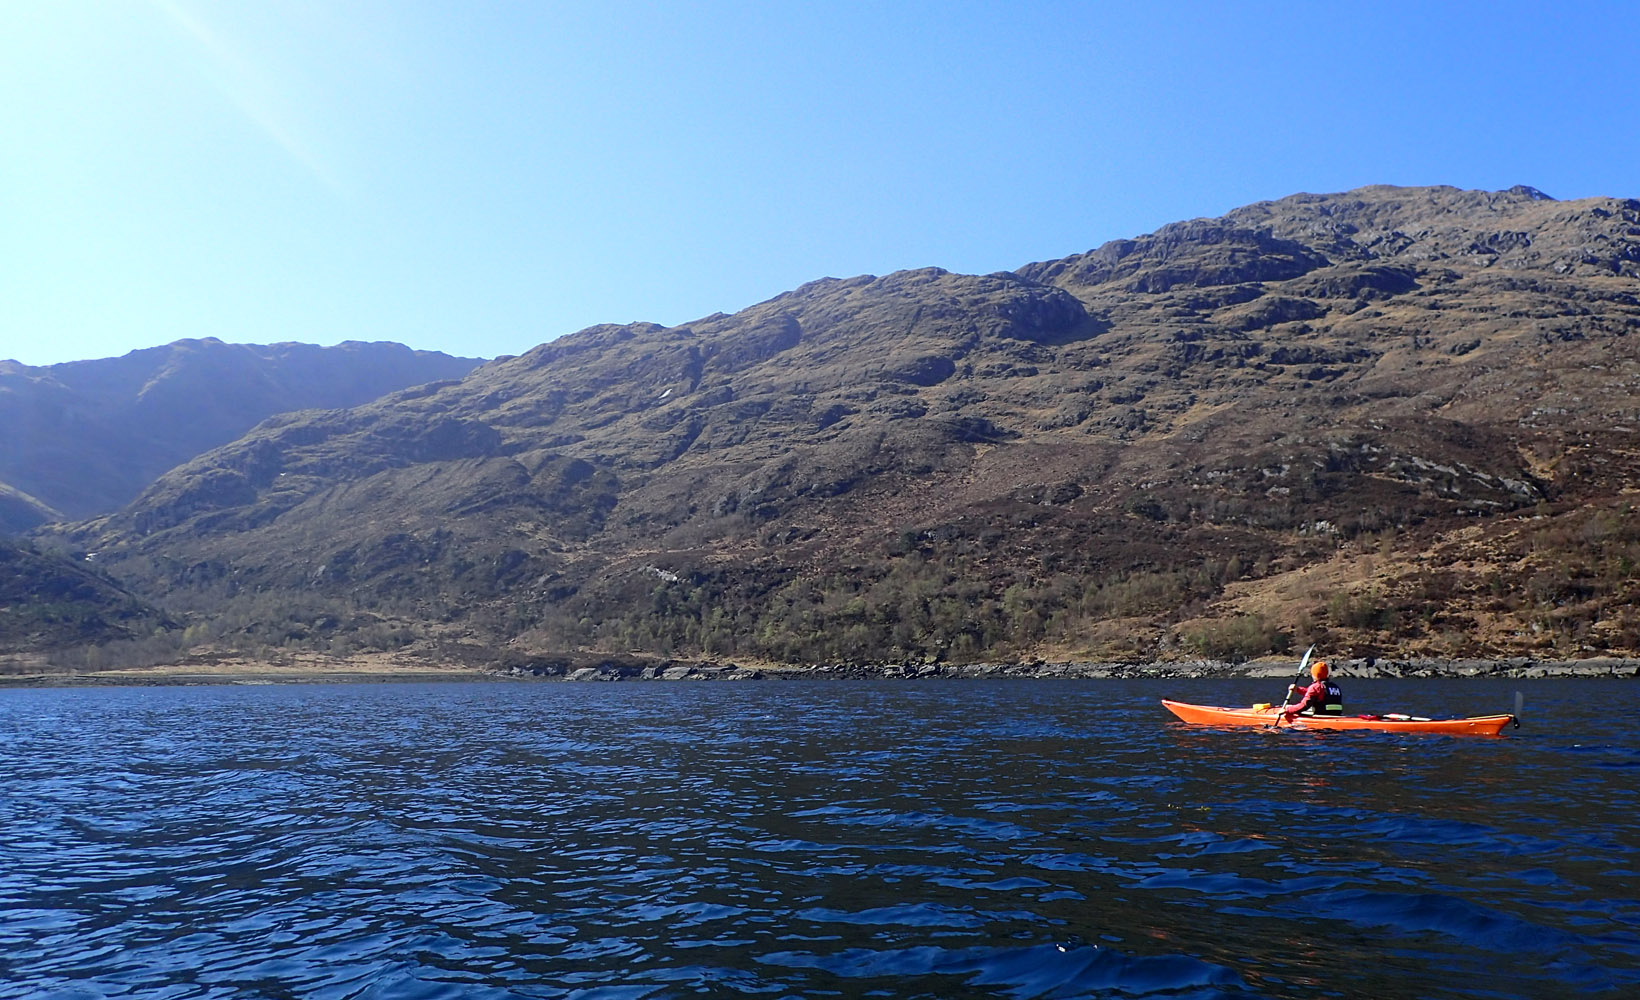 April 21 Knoydart - Crossing from Arnisdale to a river delta and potential camp